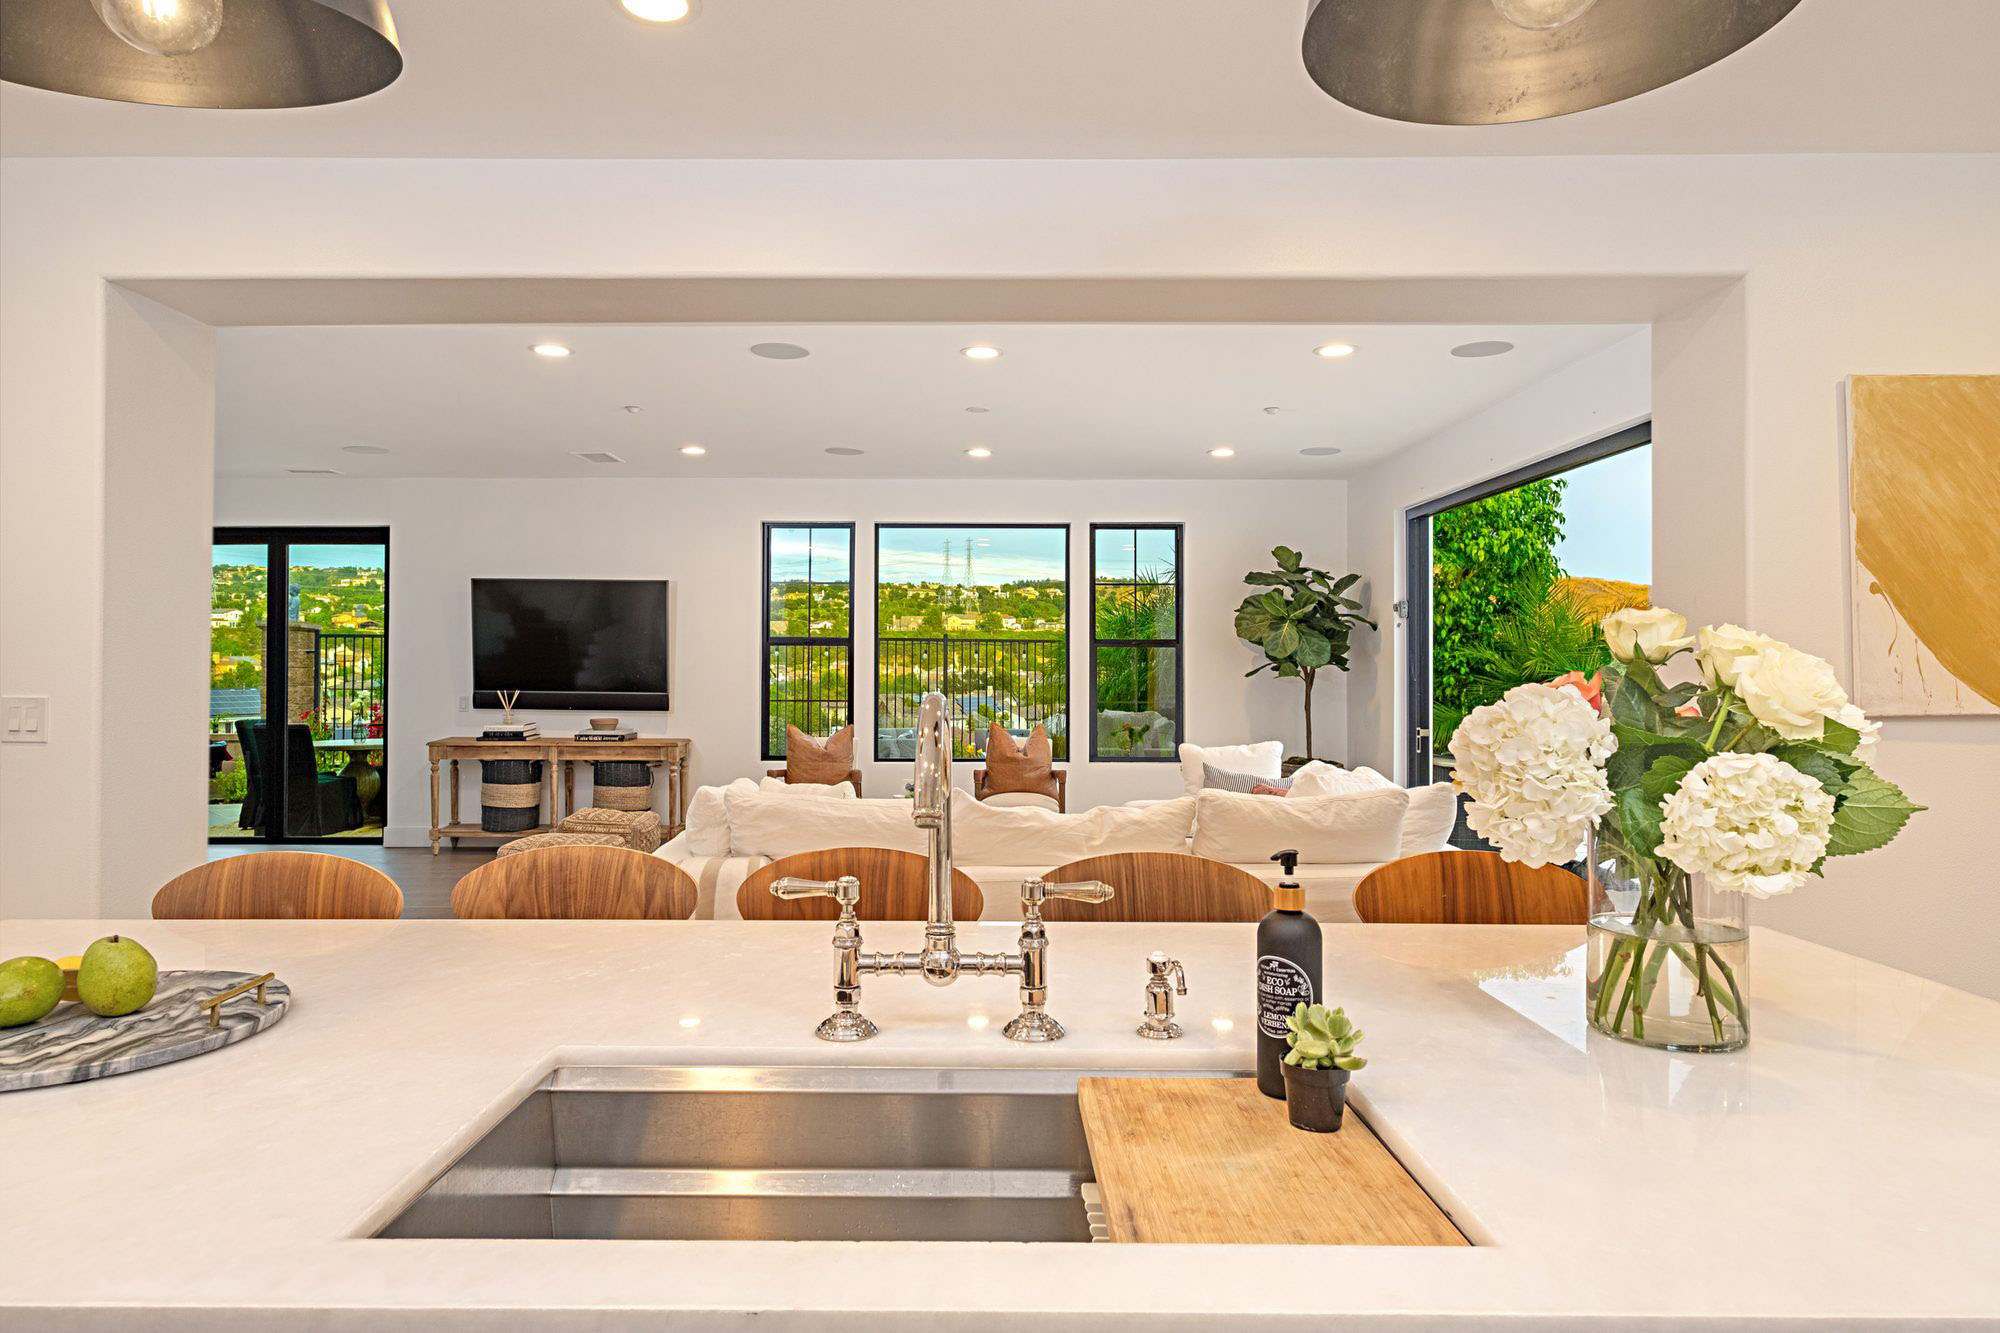 Beautiful kitchen island with plenty of seating and a fantastic view.